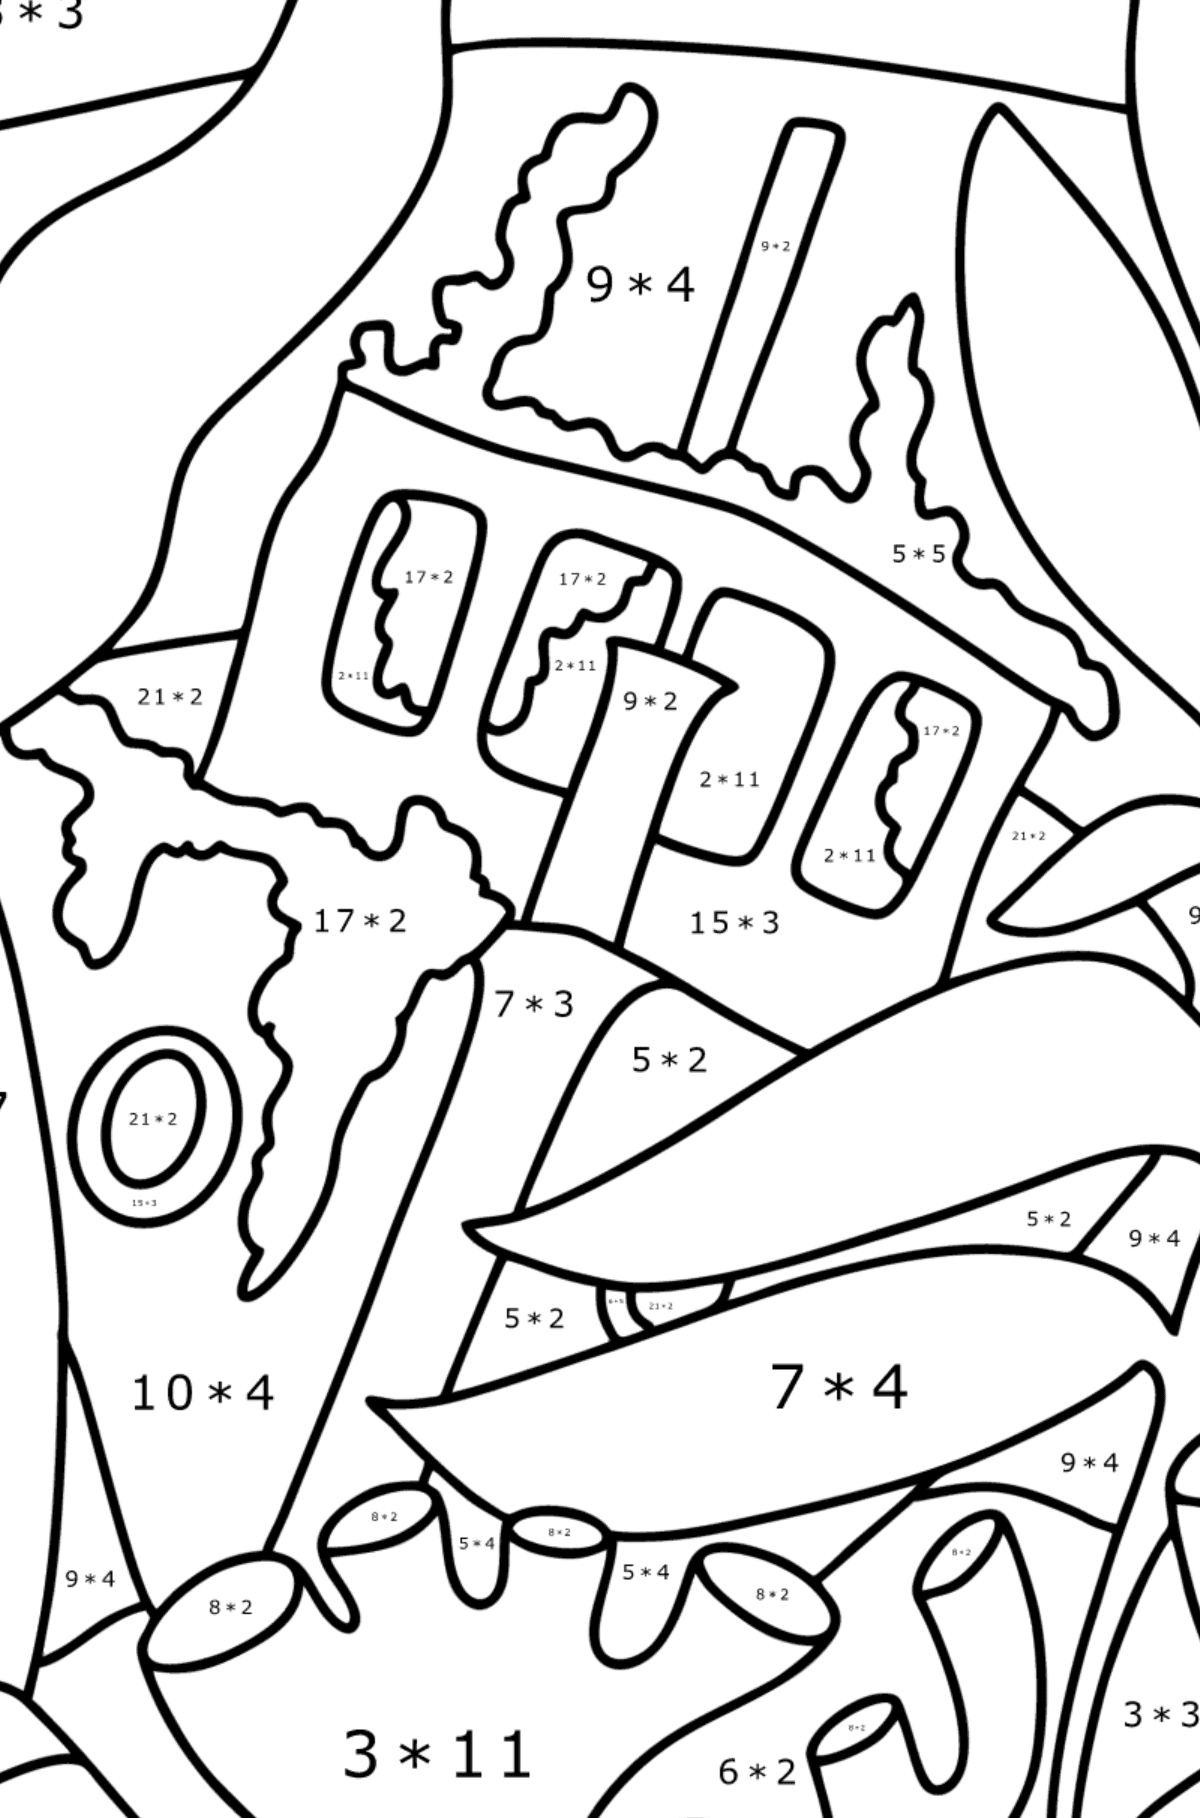 Sunken ship coloring page - Math Coloring - Multiplication for Kids